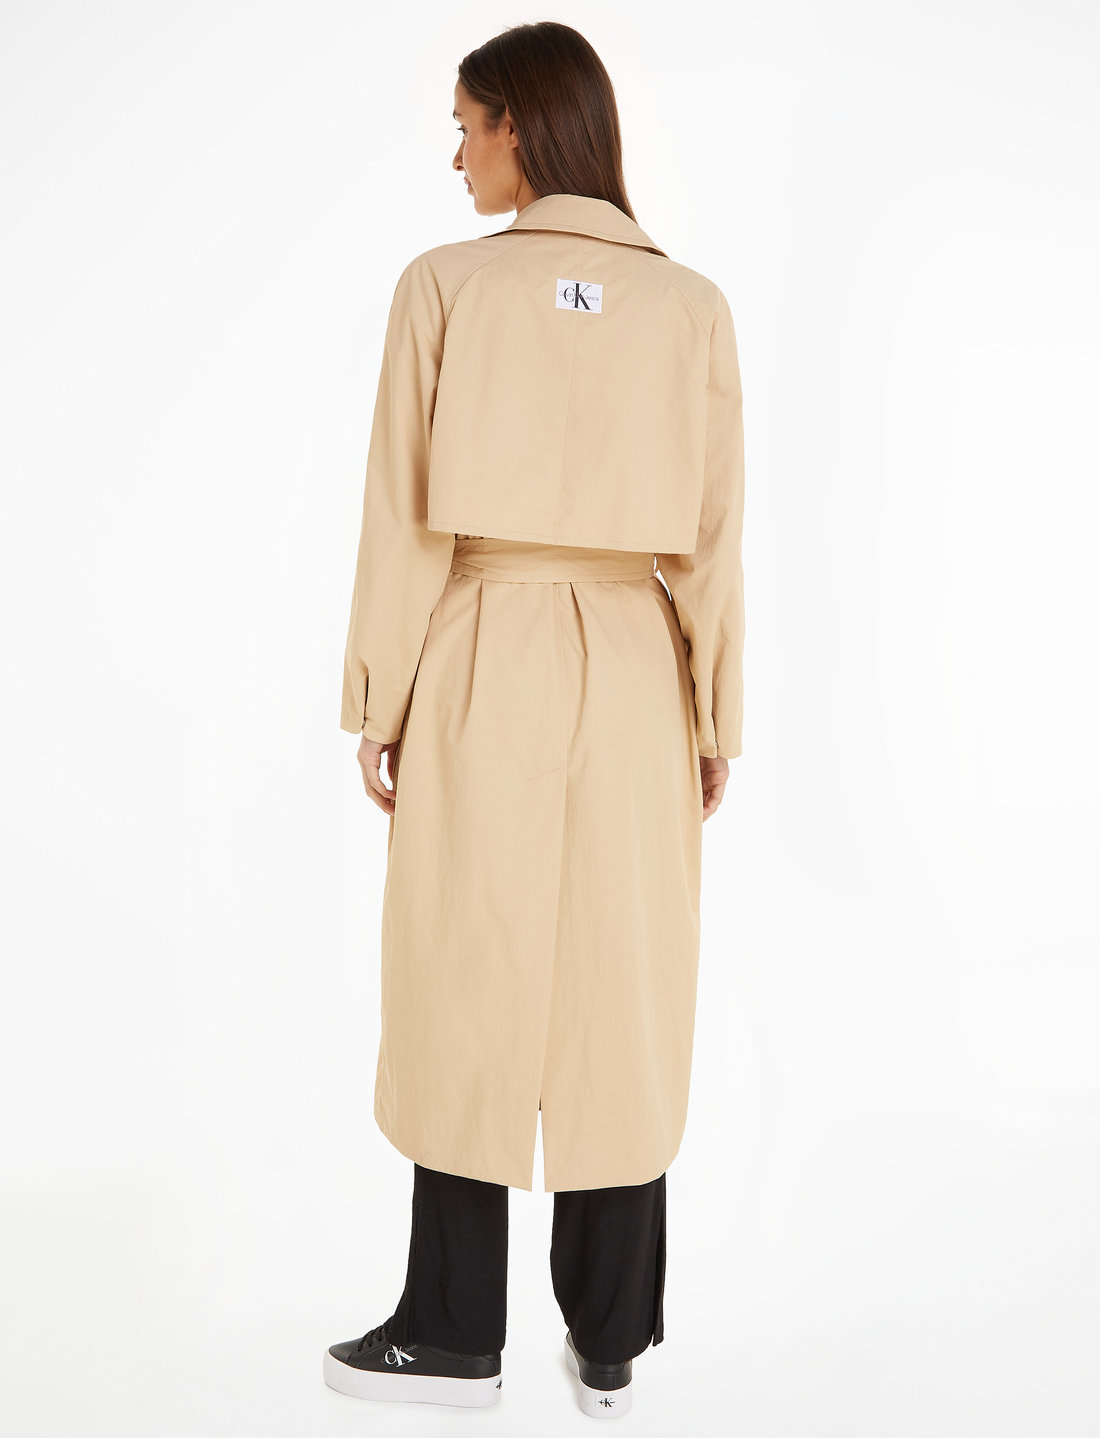 Calvin Klein Jeans Belted Trench Coat - 212.42 €. Buy Trench coats from Calvin  Klein Jeans online at Boozt.com. Fast delivery and easy returns